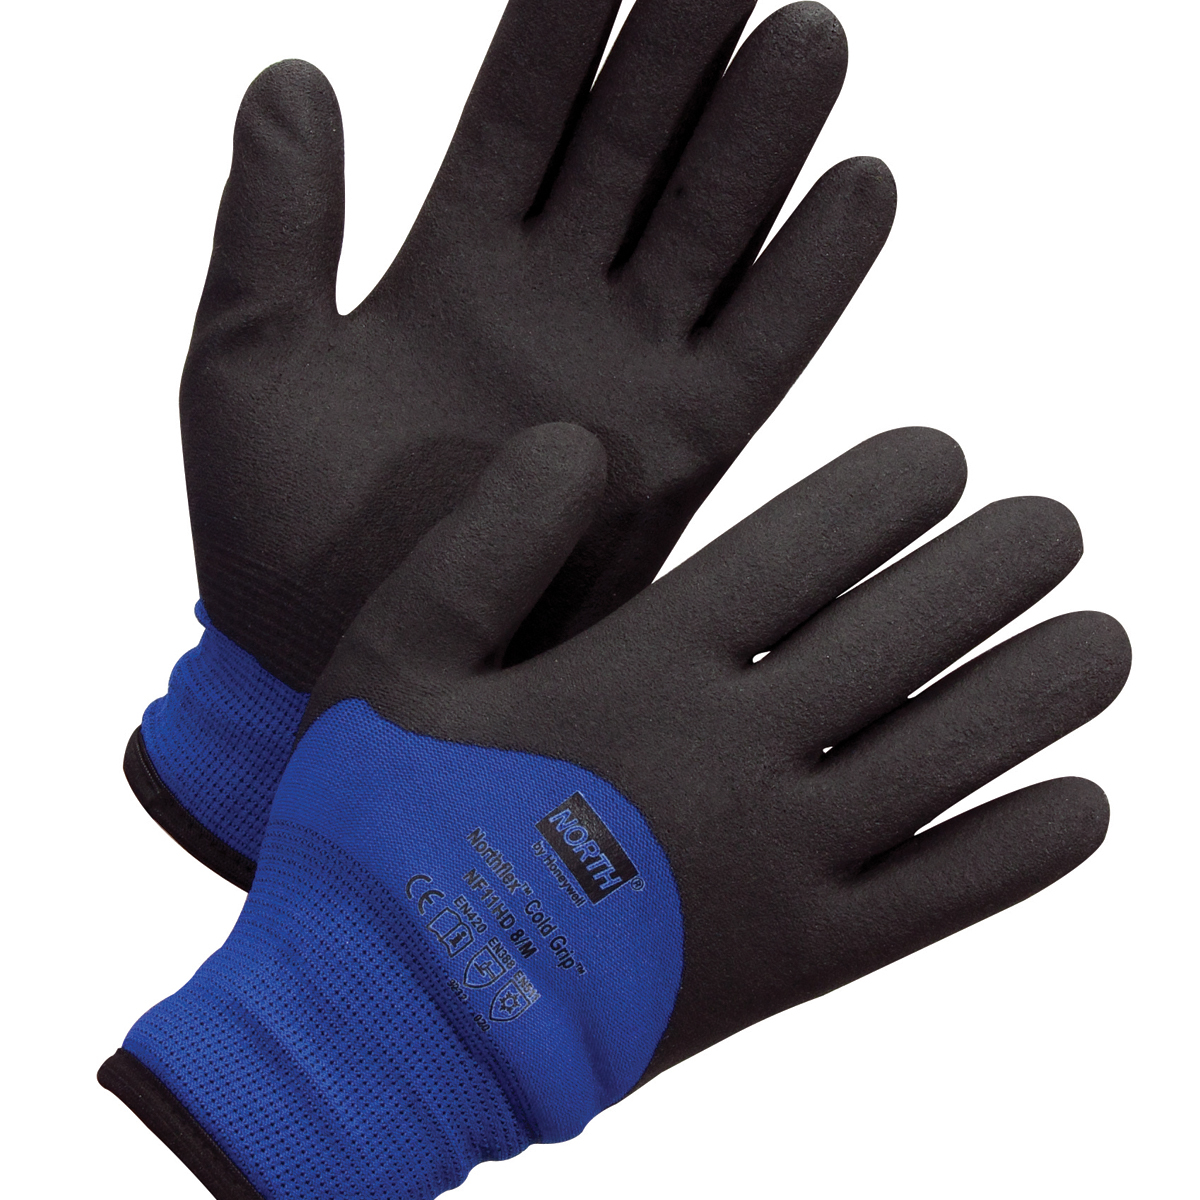 Gloves to work in the cold weather